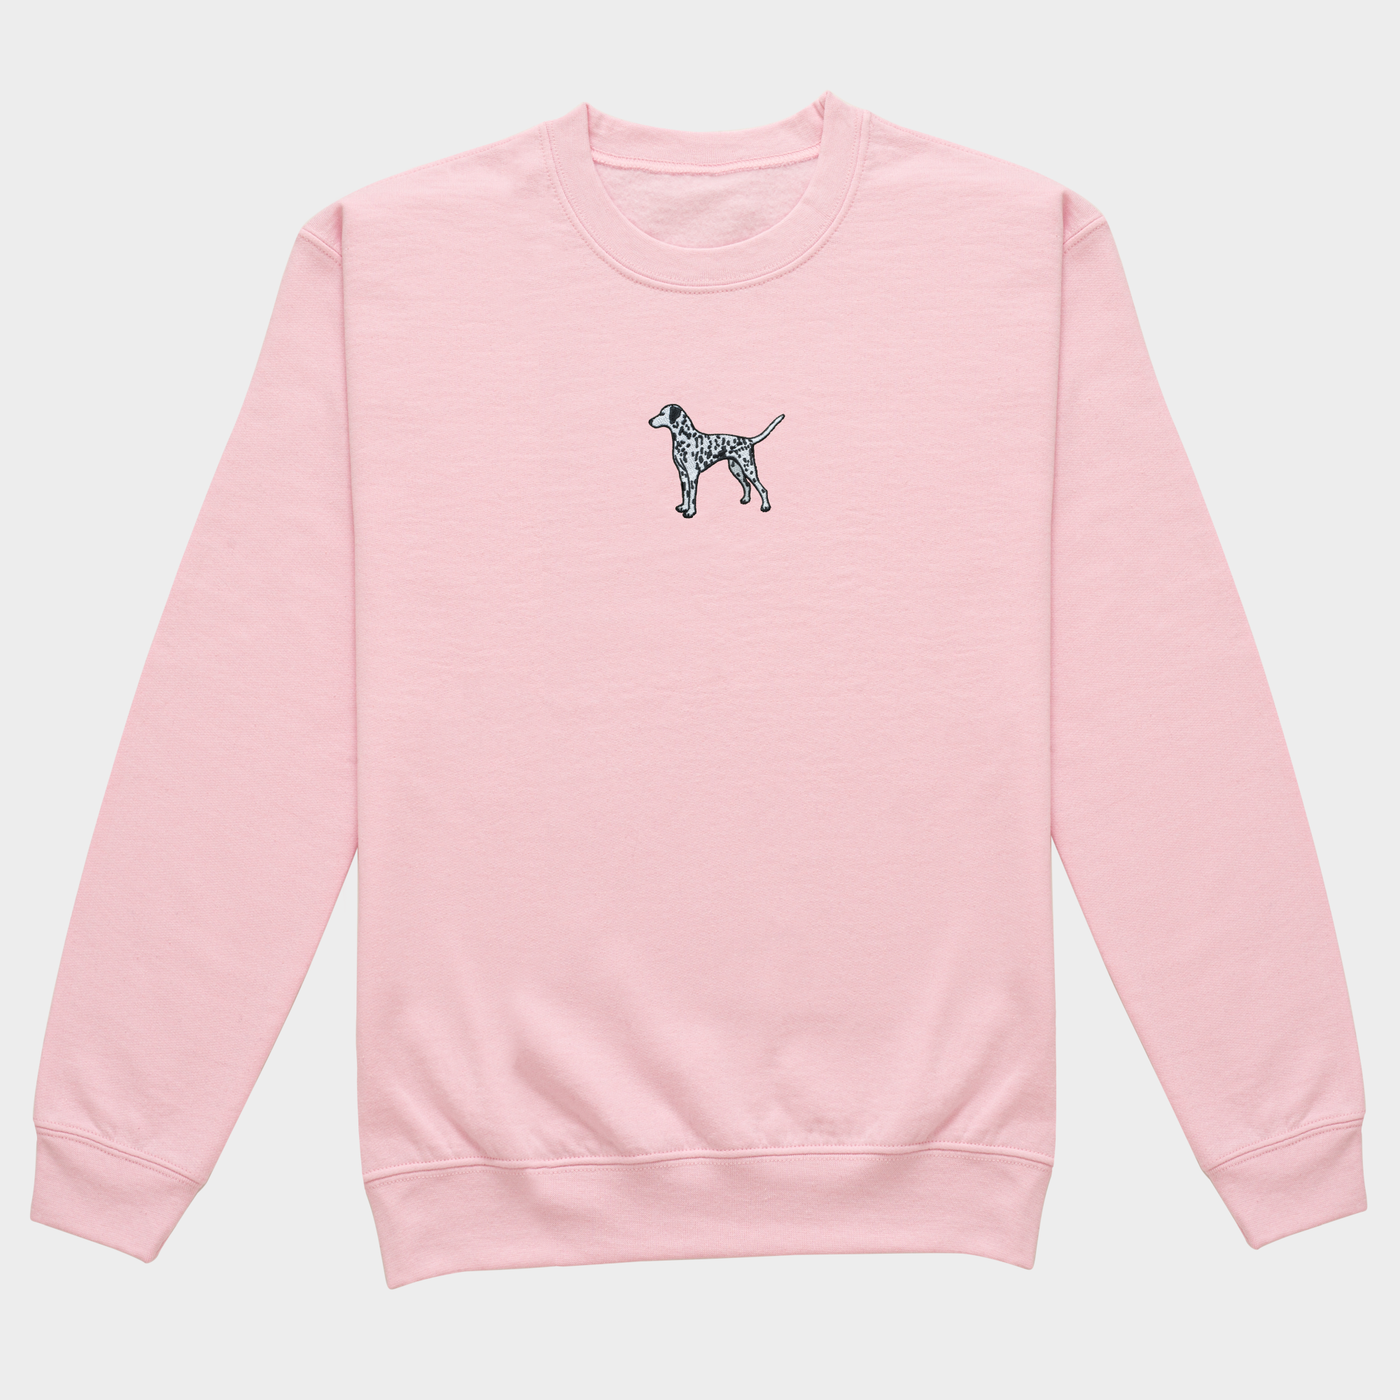 Bobby's Planet Women's Embroidered Dalmatian Sweatshirt from Paws Dog Cat Animals Collection in Light Pink Color#color_light-pink